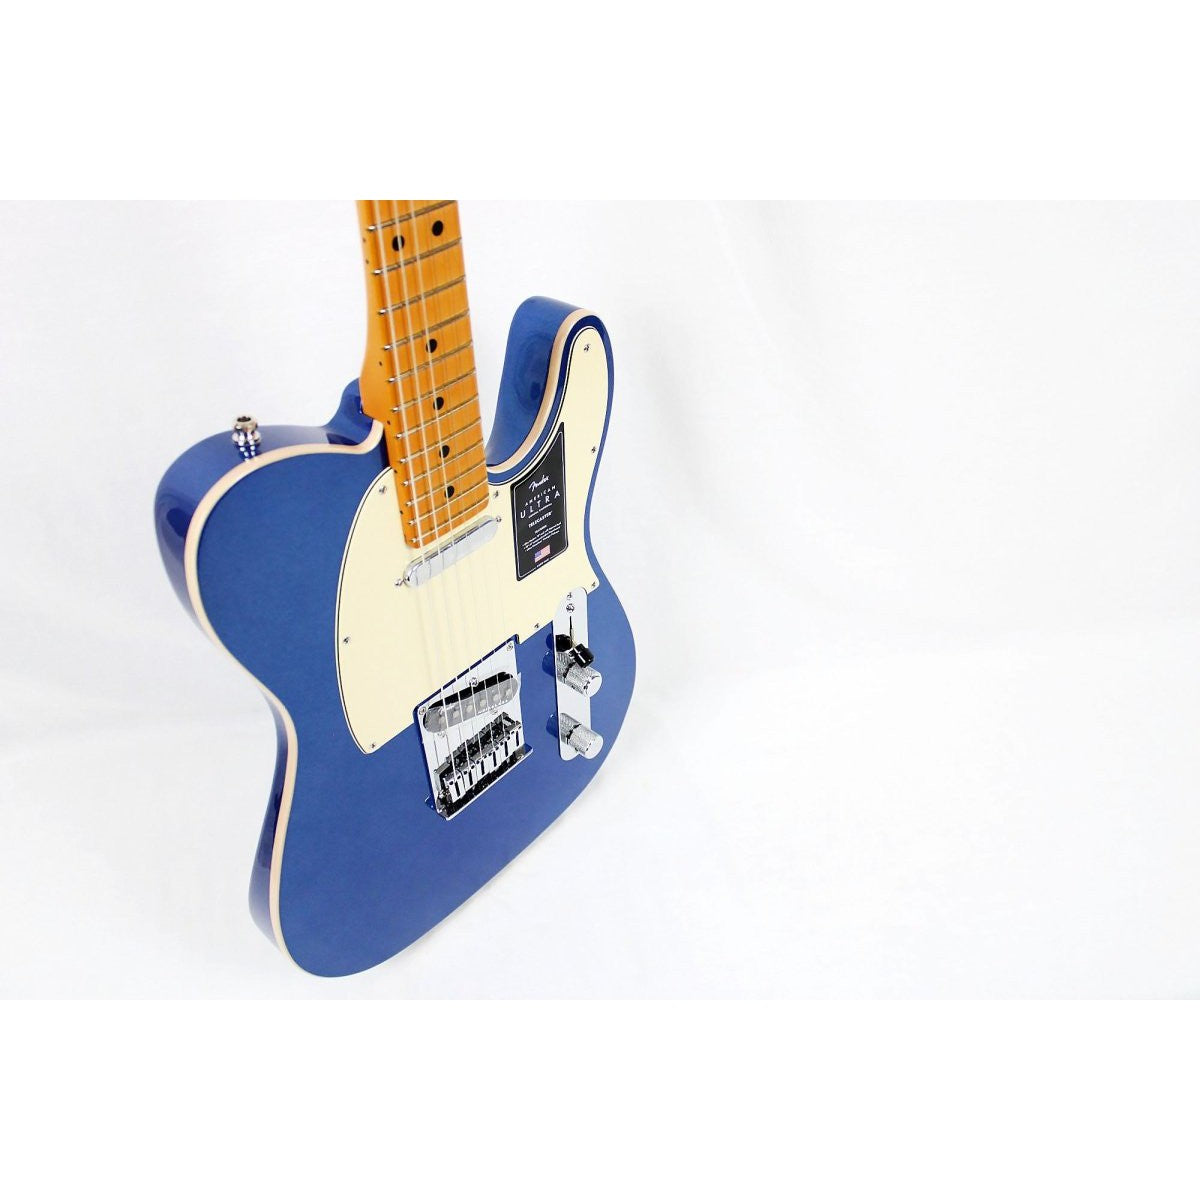 Fender American Ultra Telecaster - Cobra Blue with Maple Fingerboard